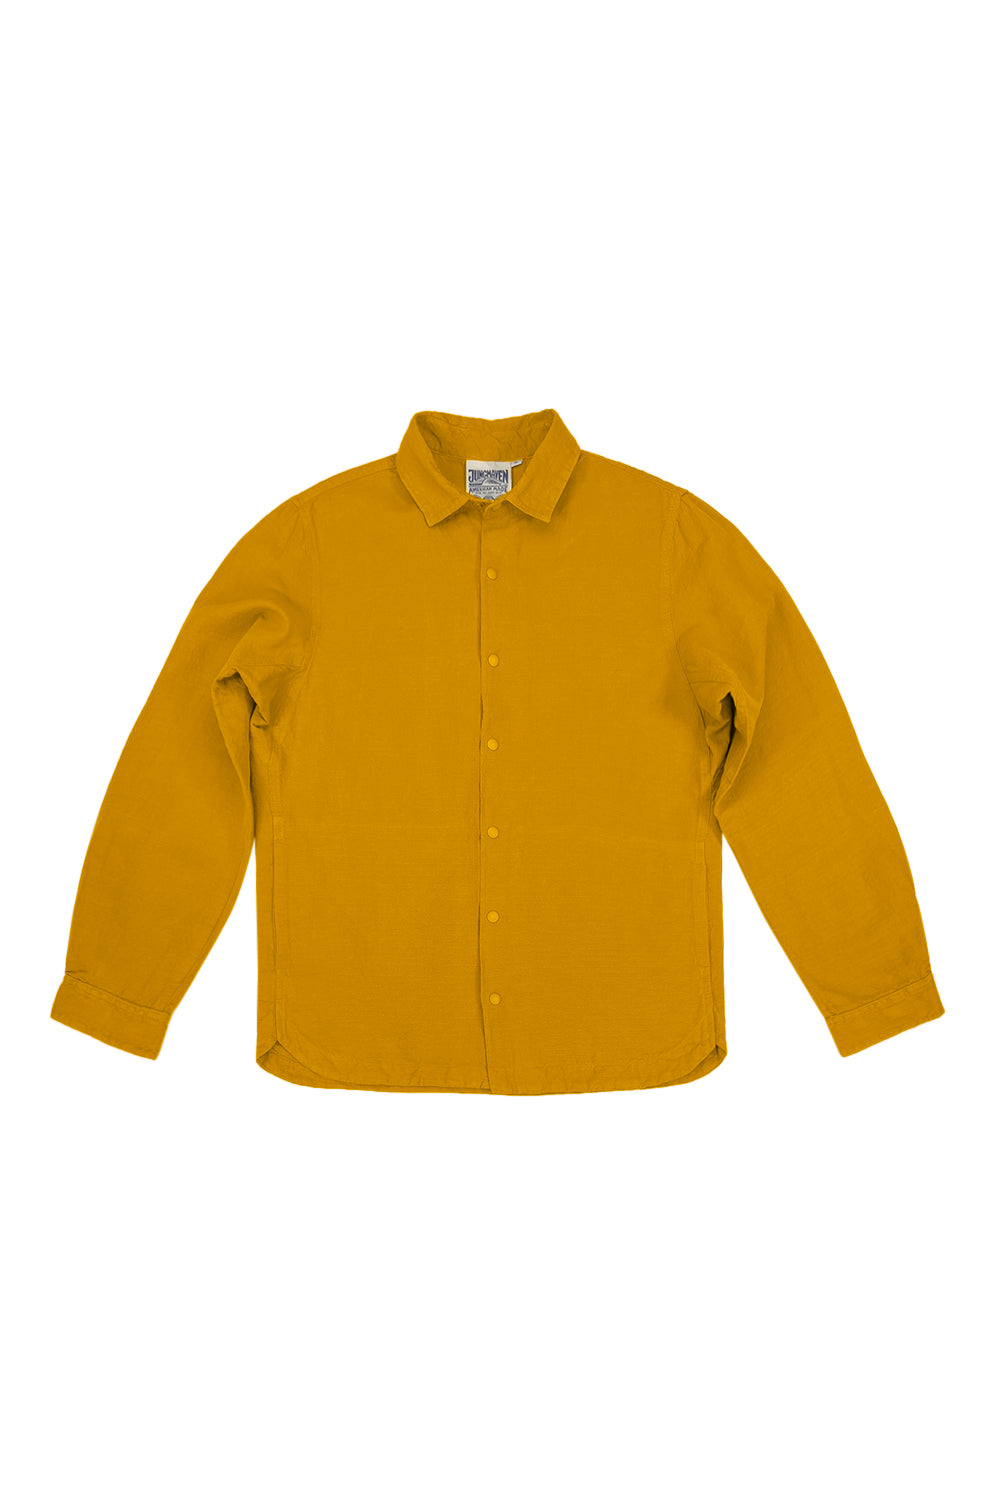 Sandpoint Snap Jacket | Jungmaven Hemp Clothing & Accessories / Color: Spicy Mustard